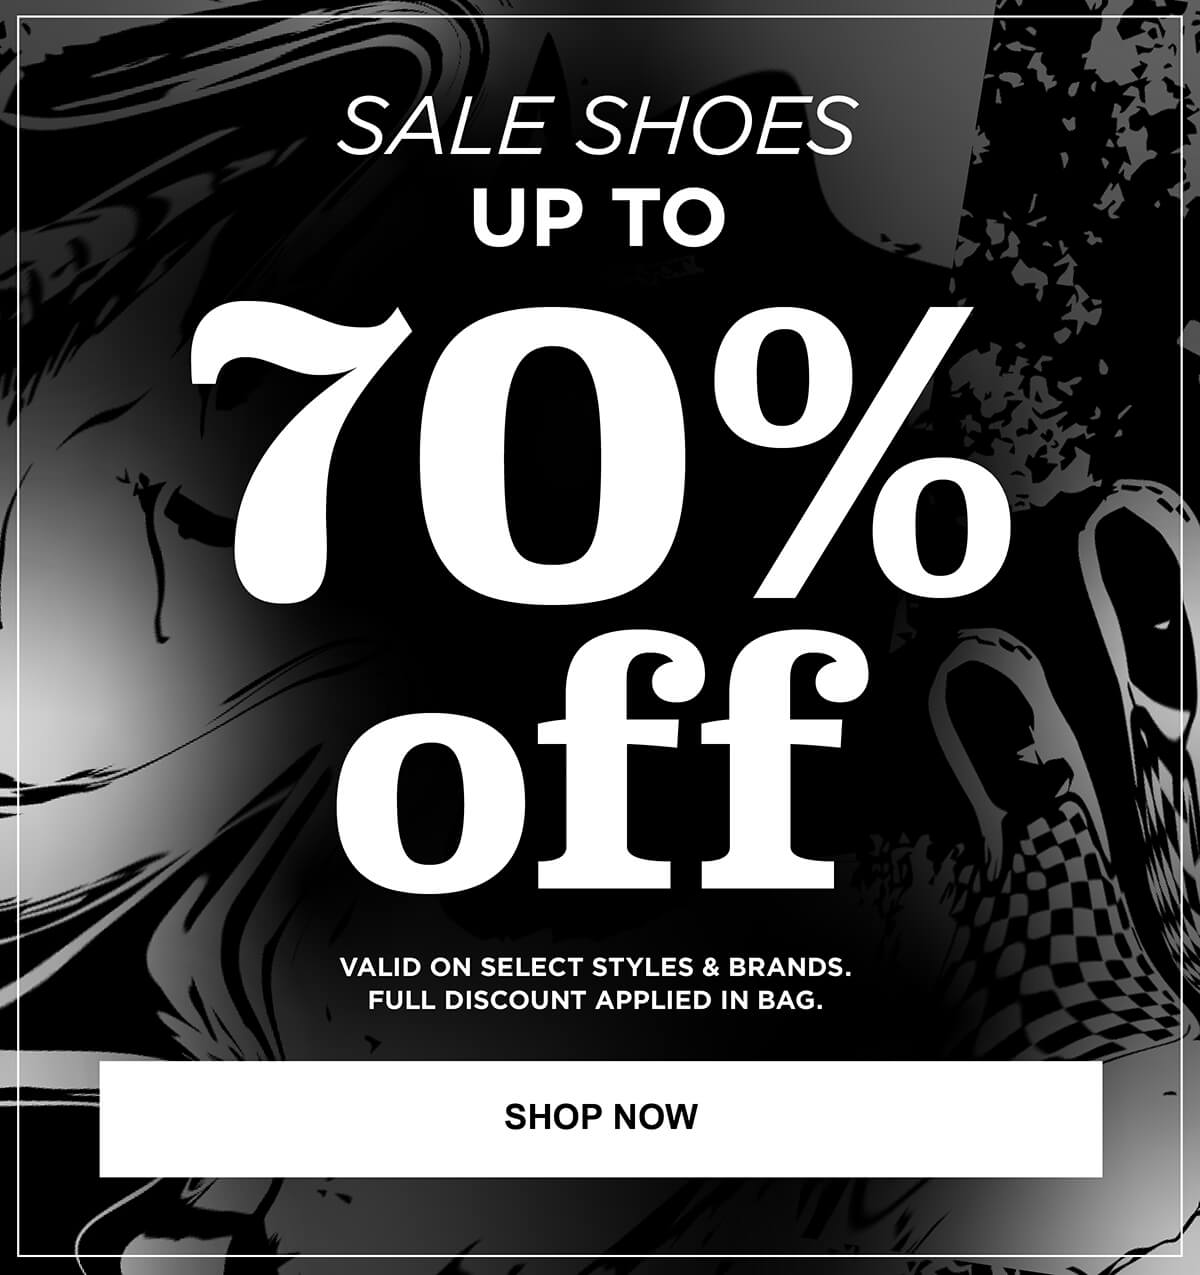 SALE SHOES - UP TO 70% OFF - SHOP NOW